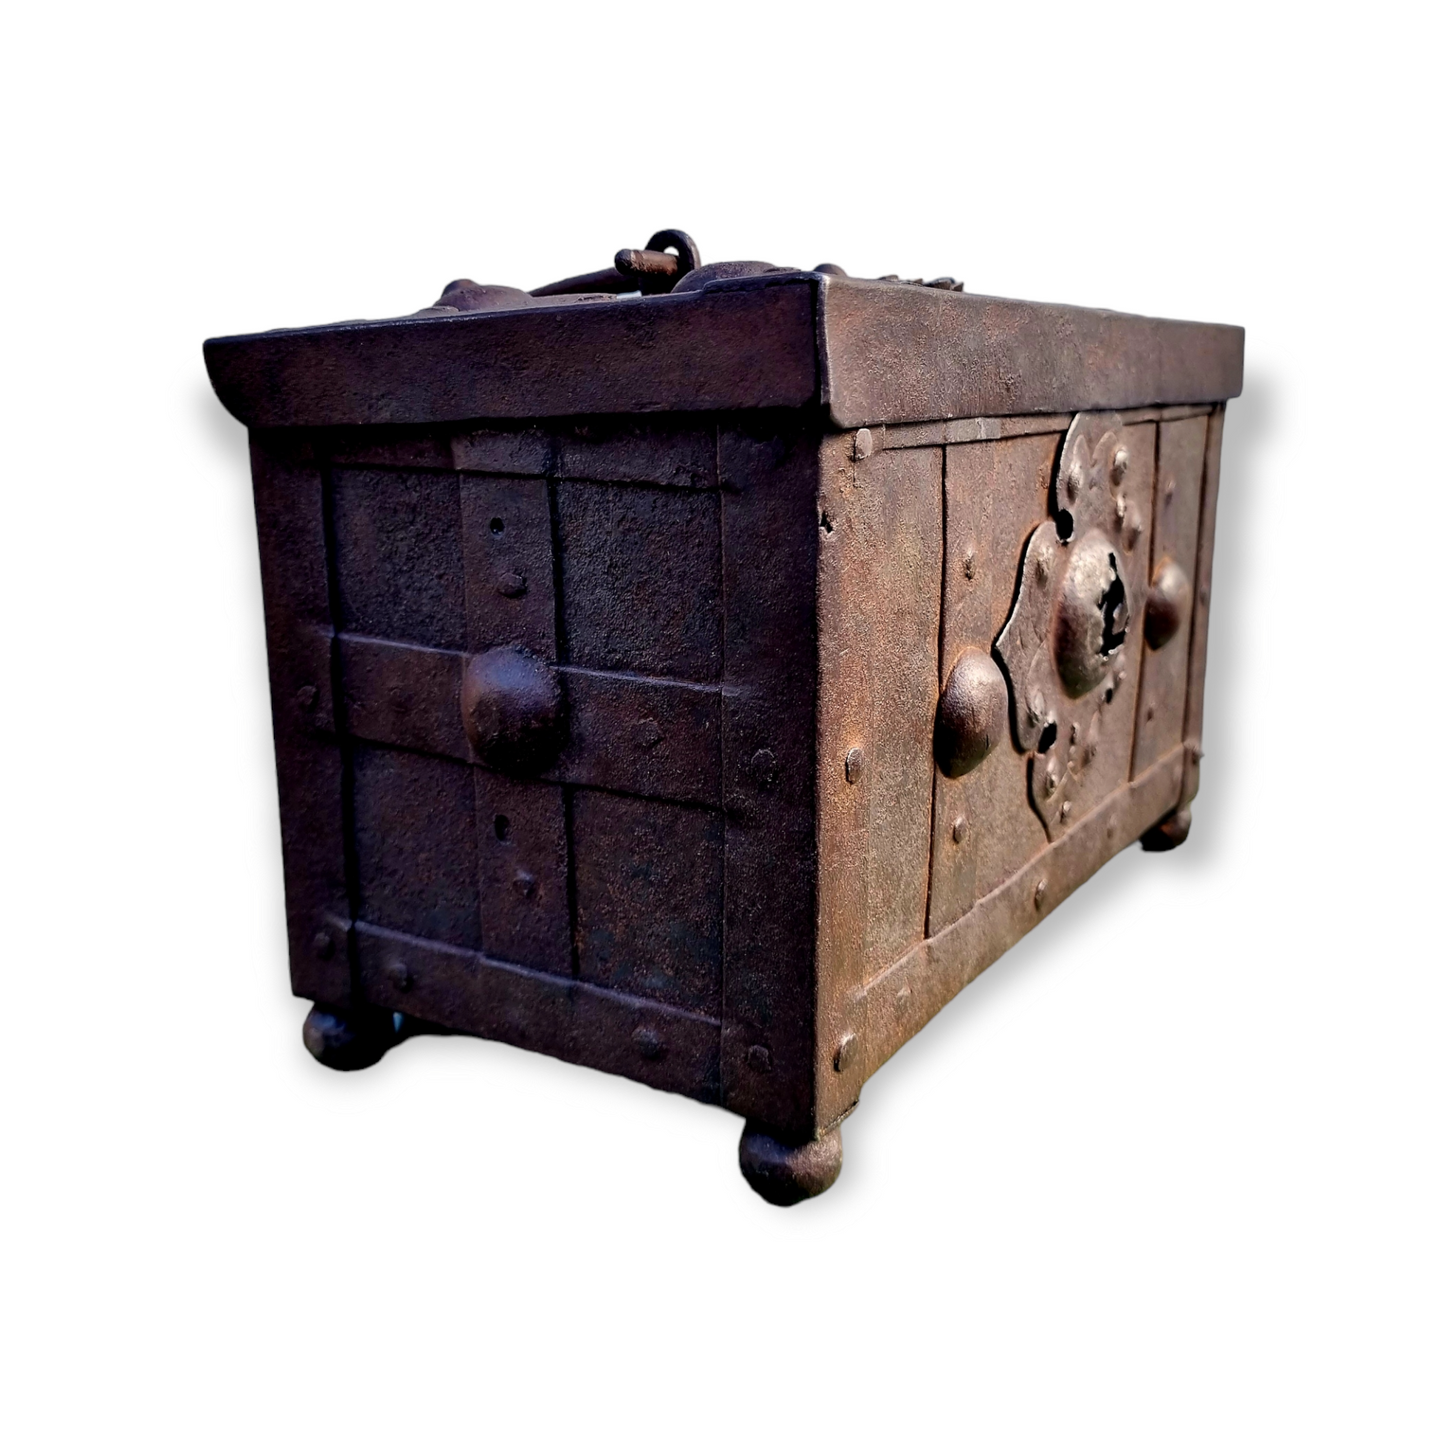 Early 17th Century German Antique Iron Nuremberg-Made Miniature Table Casket / Strongbox